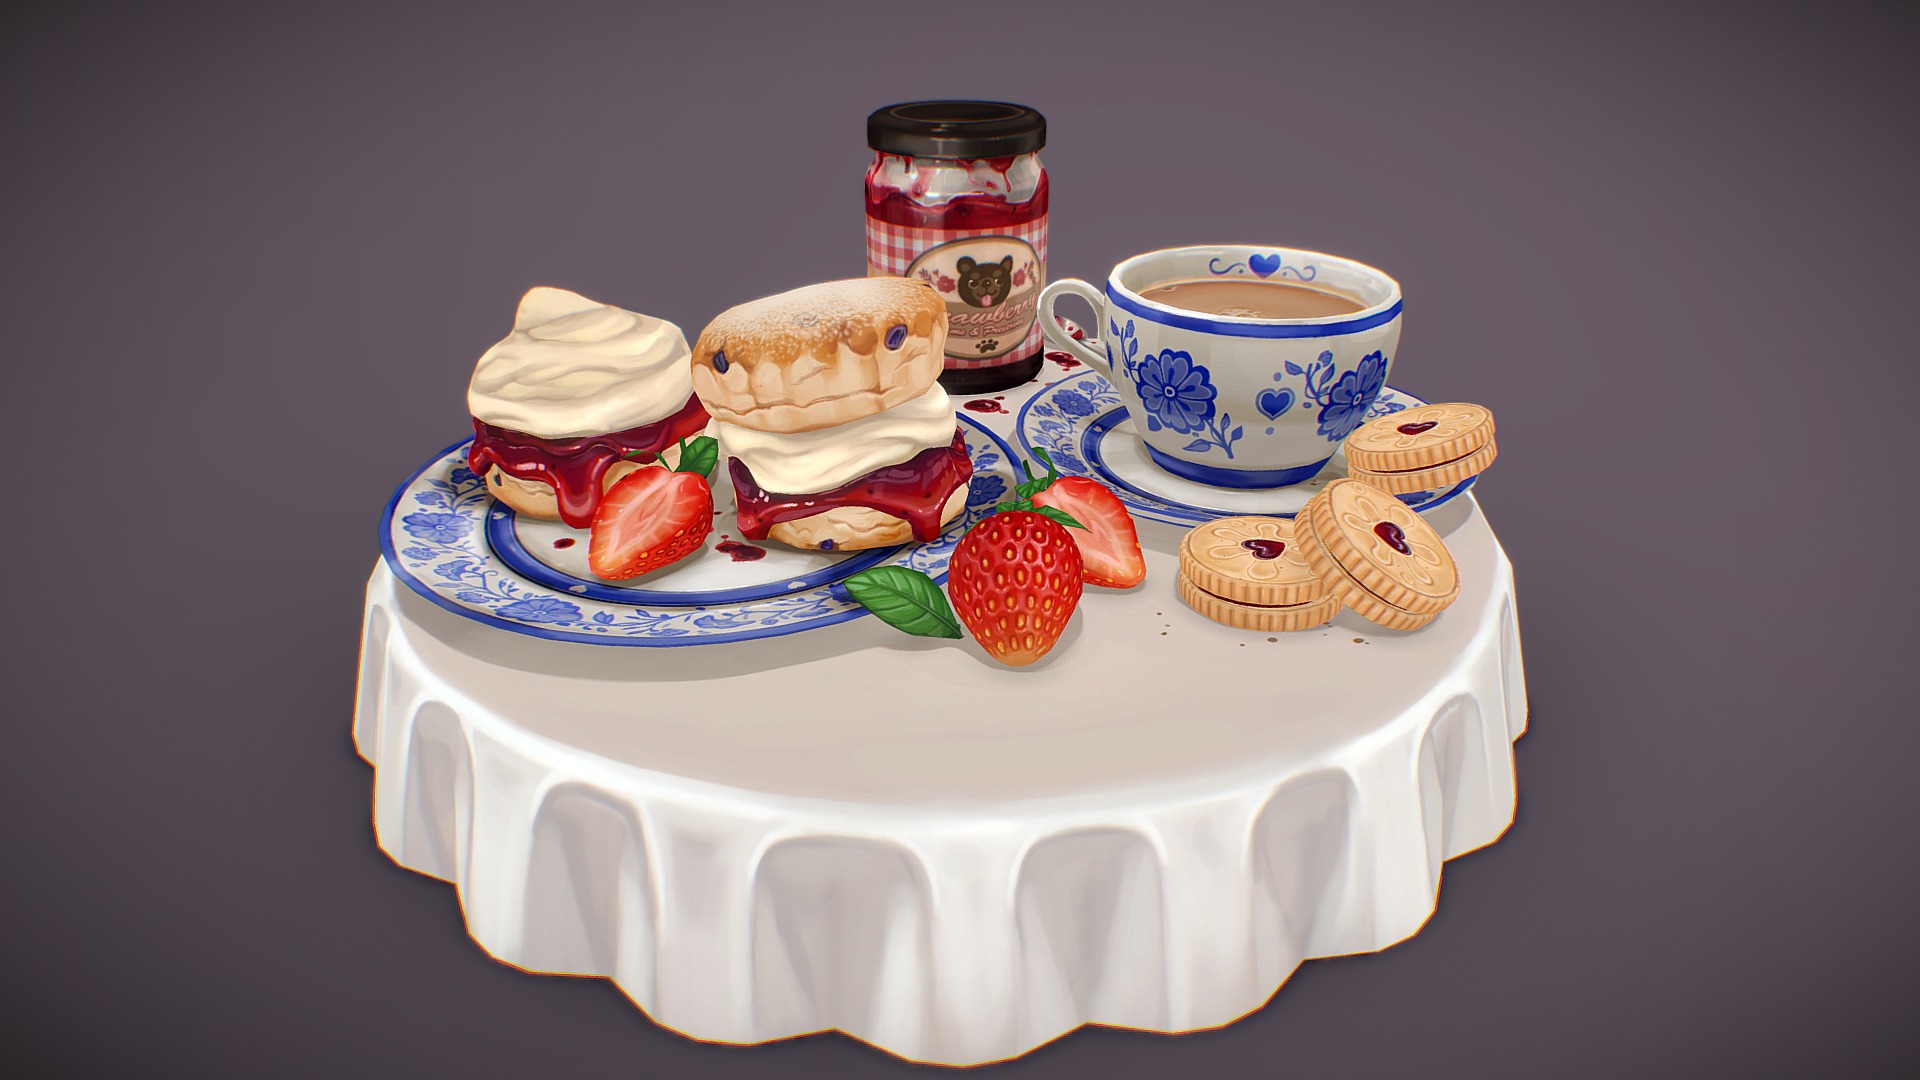 Wanted to learn to use 3D coat, so I put together this little hand-painted scene of cosy tea and scones. Oh, and Jammy Dodgers biscuits. Because what goes better with jam than more jam?
Ok, I just really enjoyed painting jam 3d model